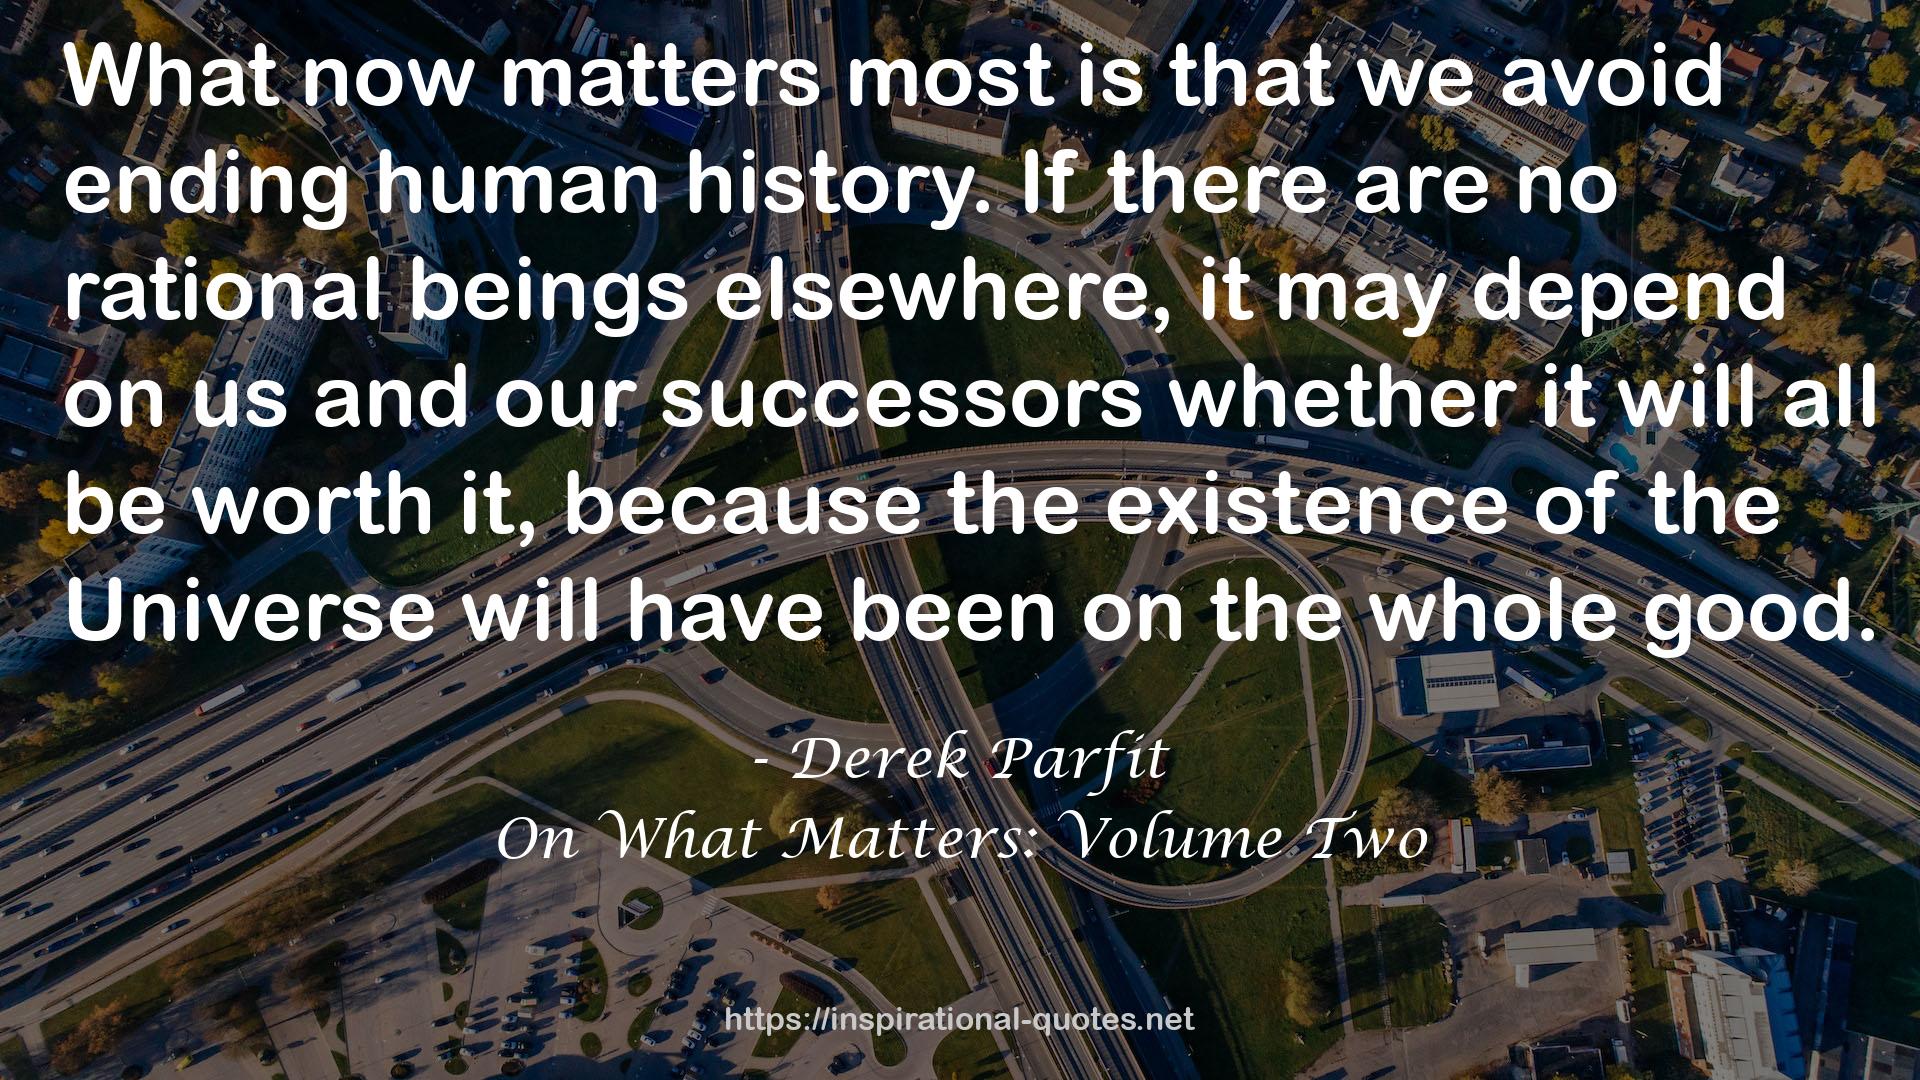 On What Matters: Volume Two QUOTES